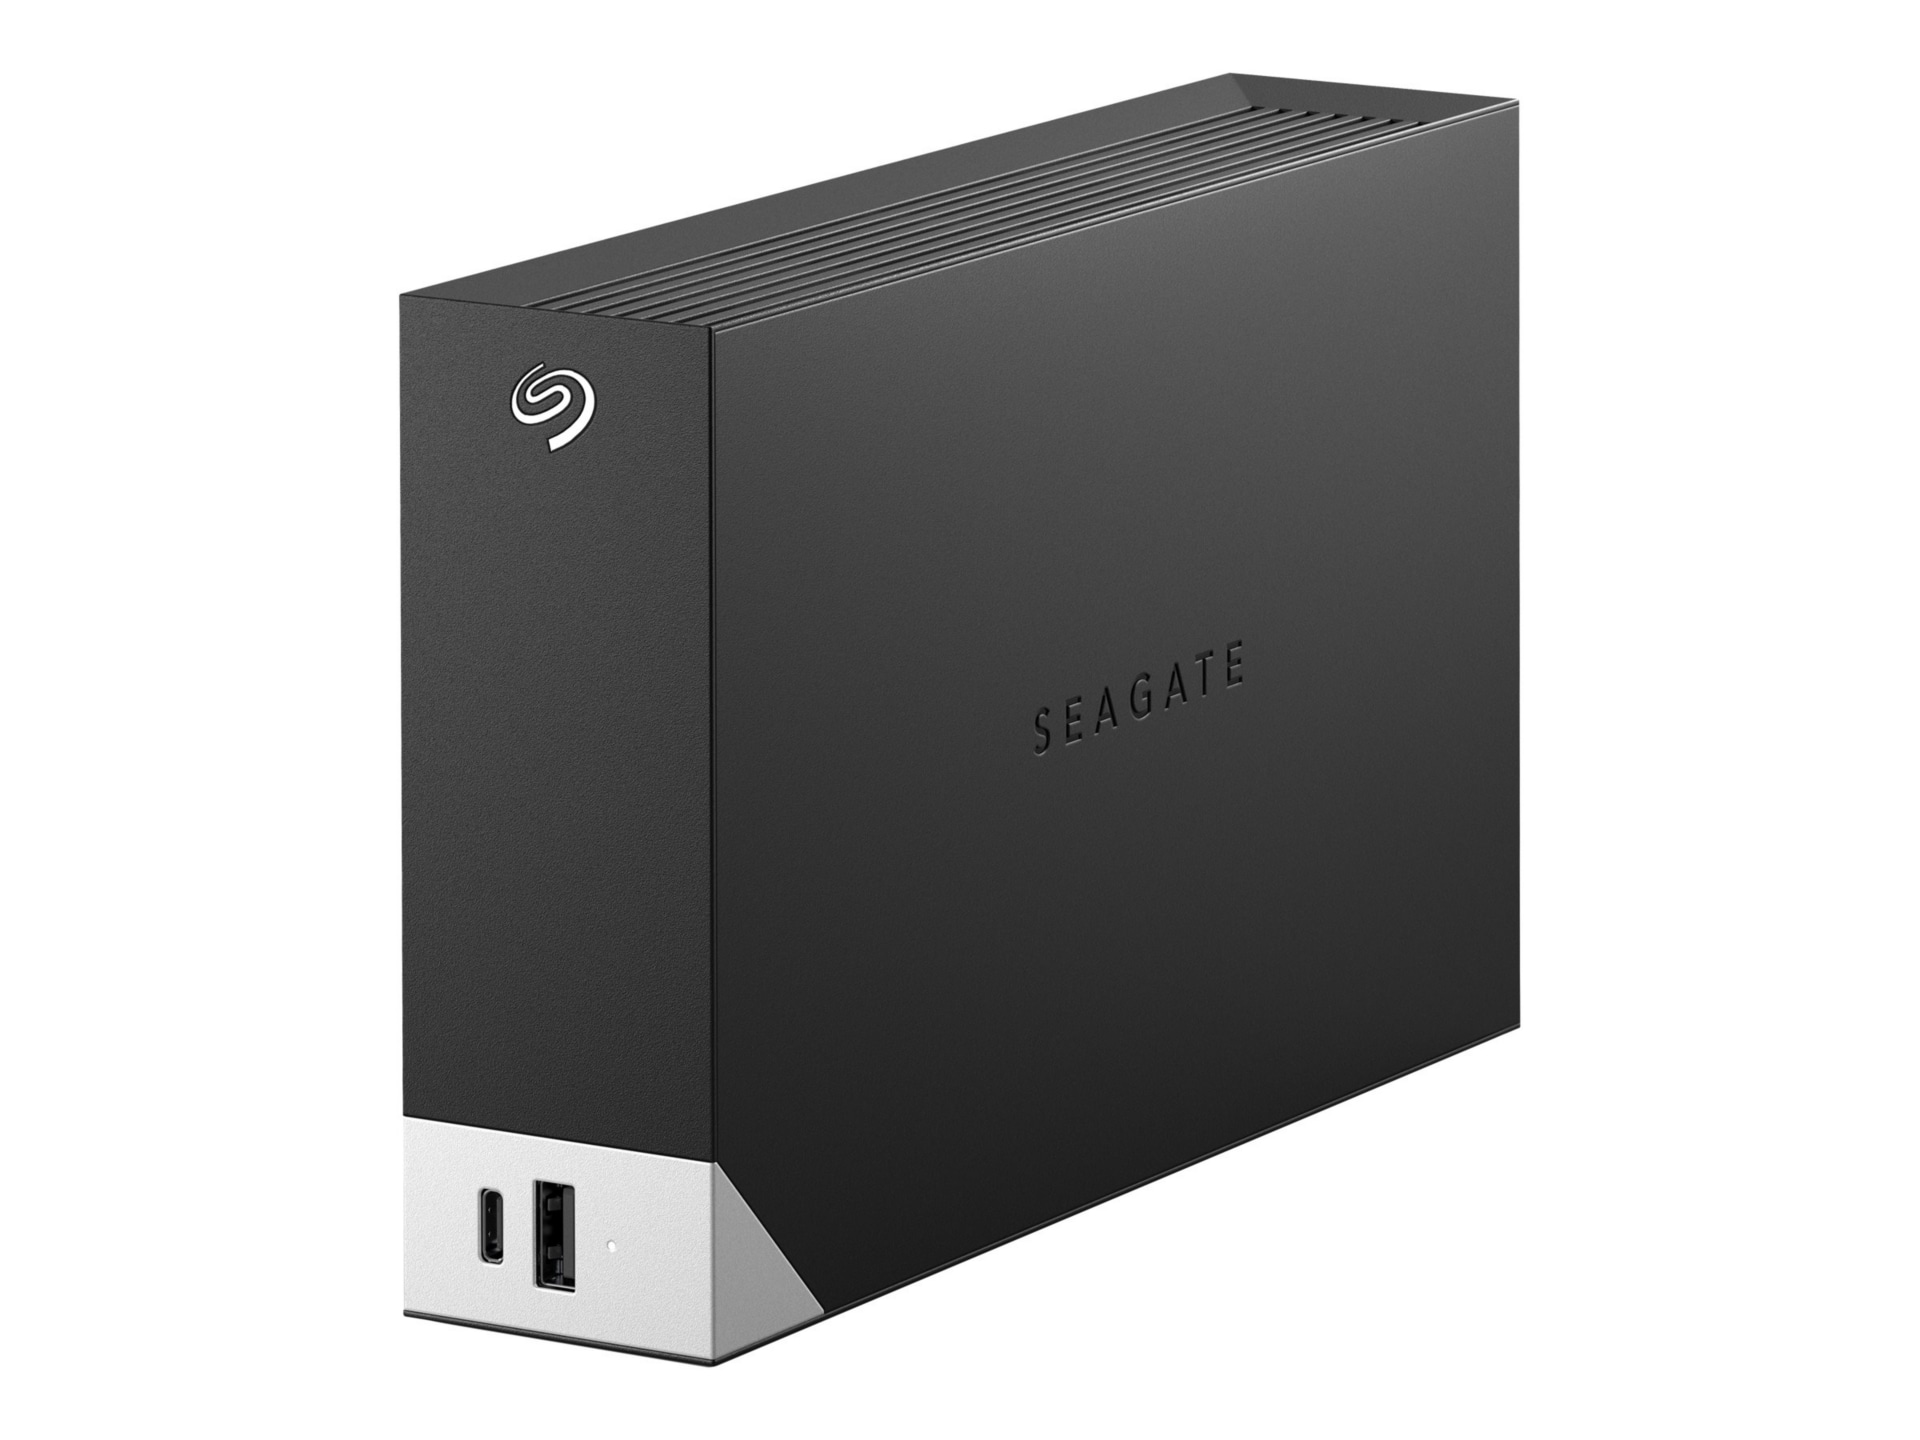 Seagate One Touch with hub STLC8000400 - disque dur - 8 To - USB 3.0